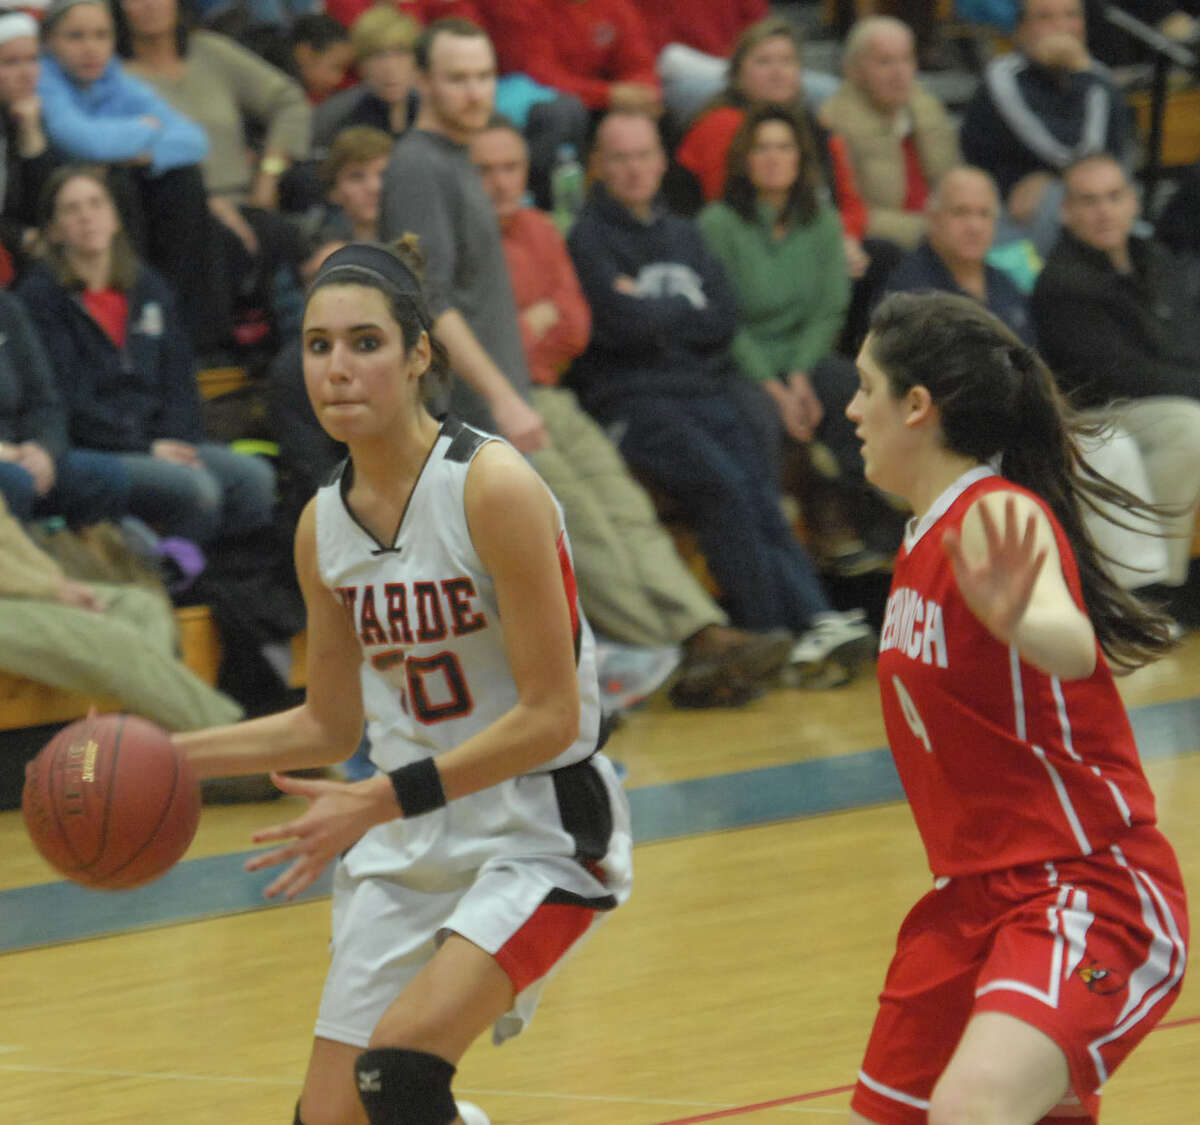 Warde’s Sarah Cotto drives to the hoop against Greenwich Tuesday. Photo by Mary Albl